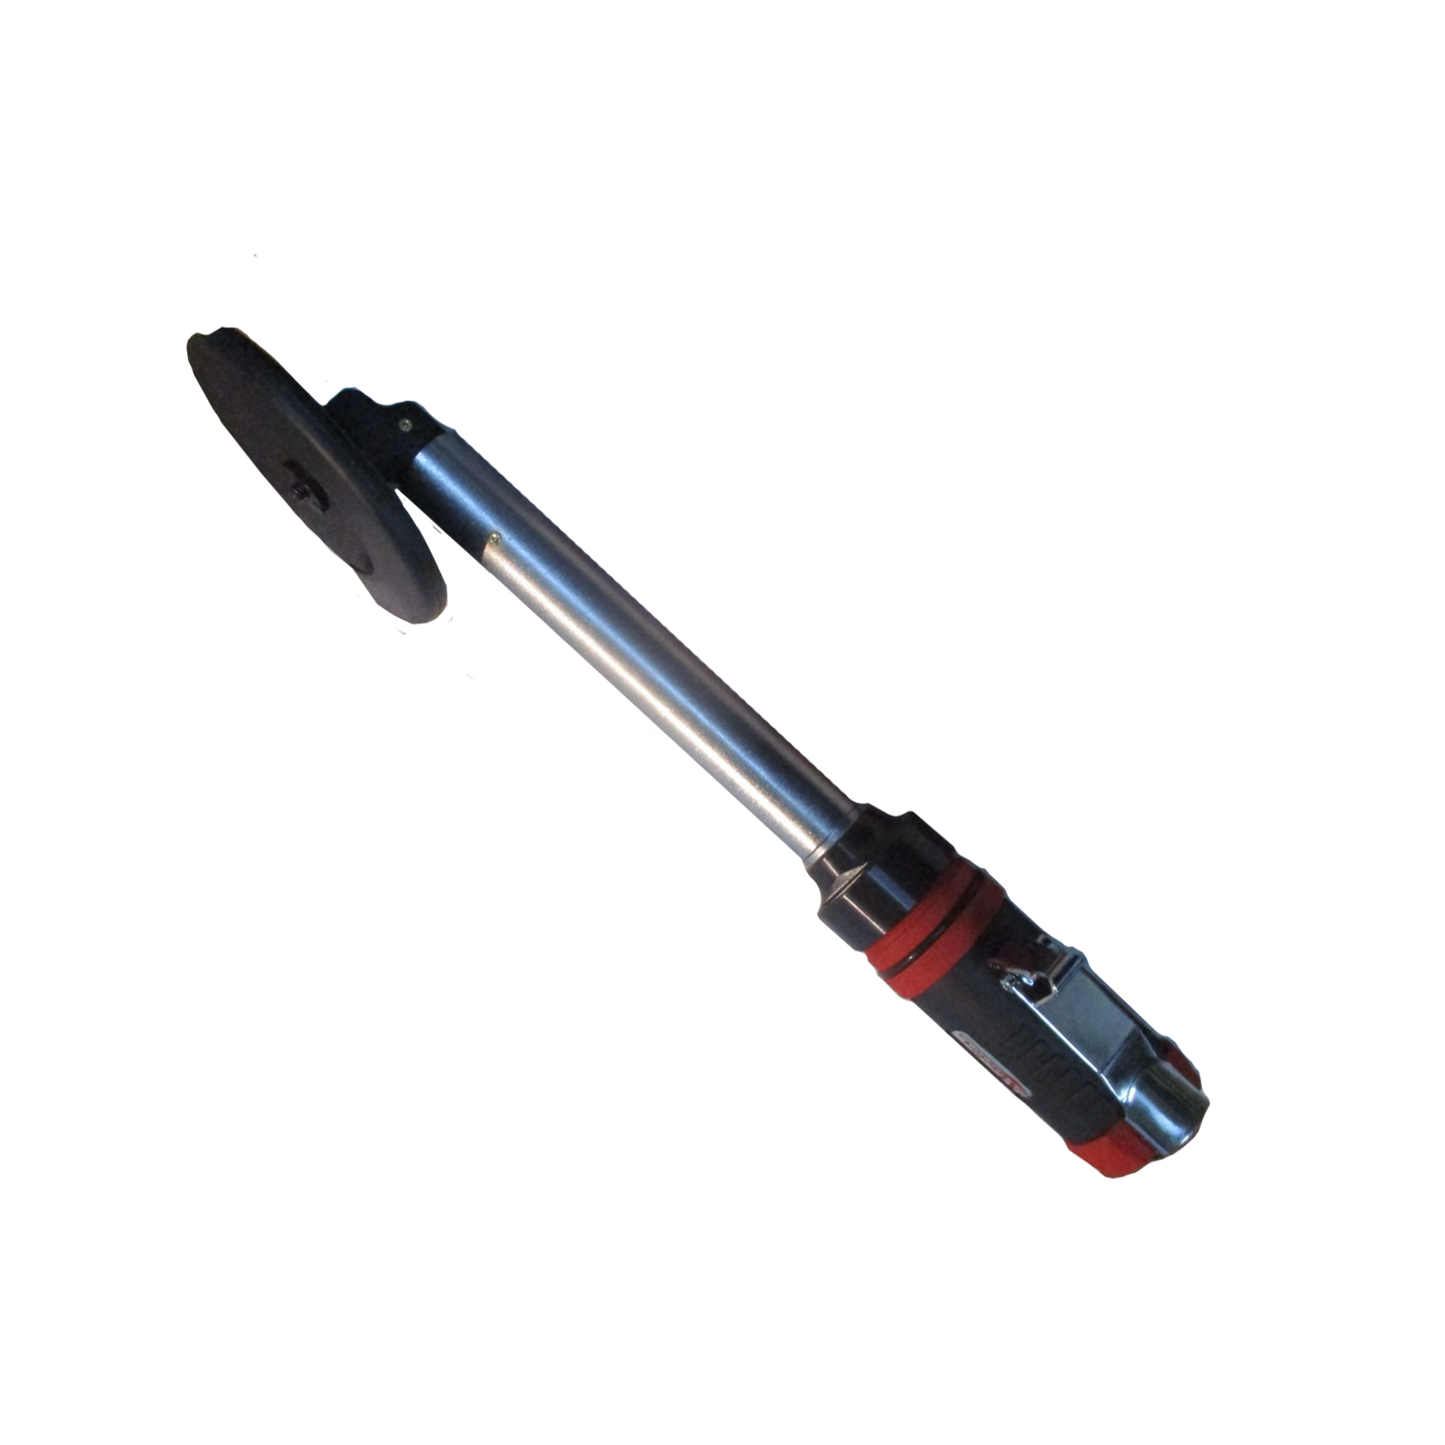 7-Inch Long Neck Extended Angle Cut-off /Grinder Tool - 19000 Rpm